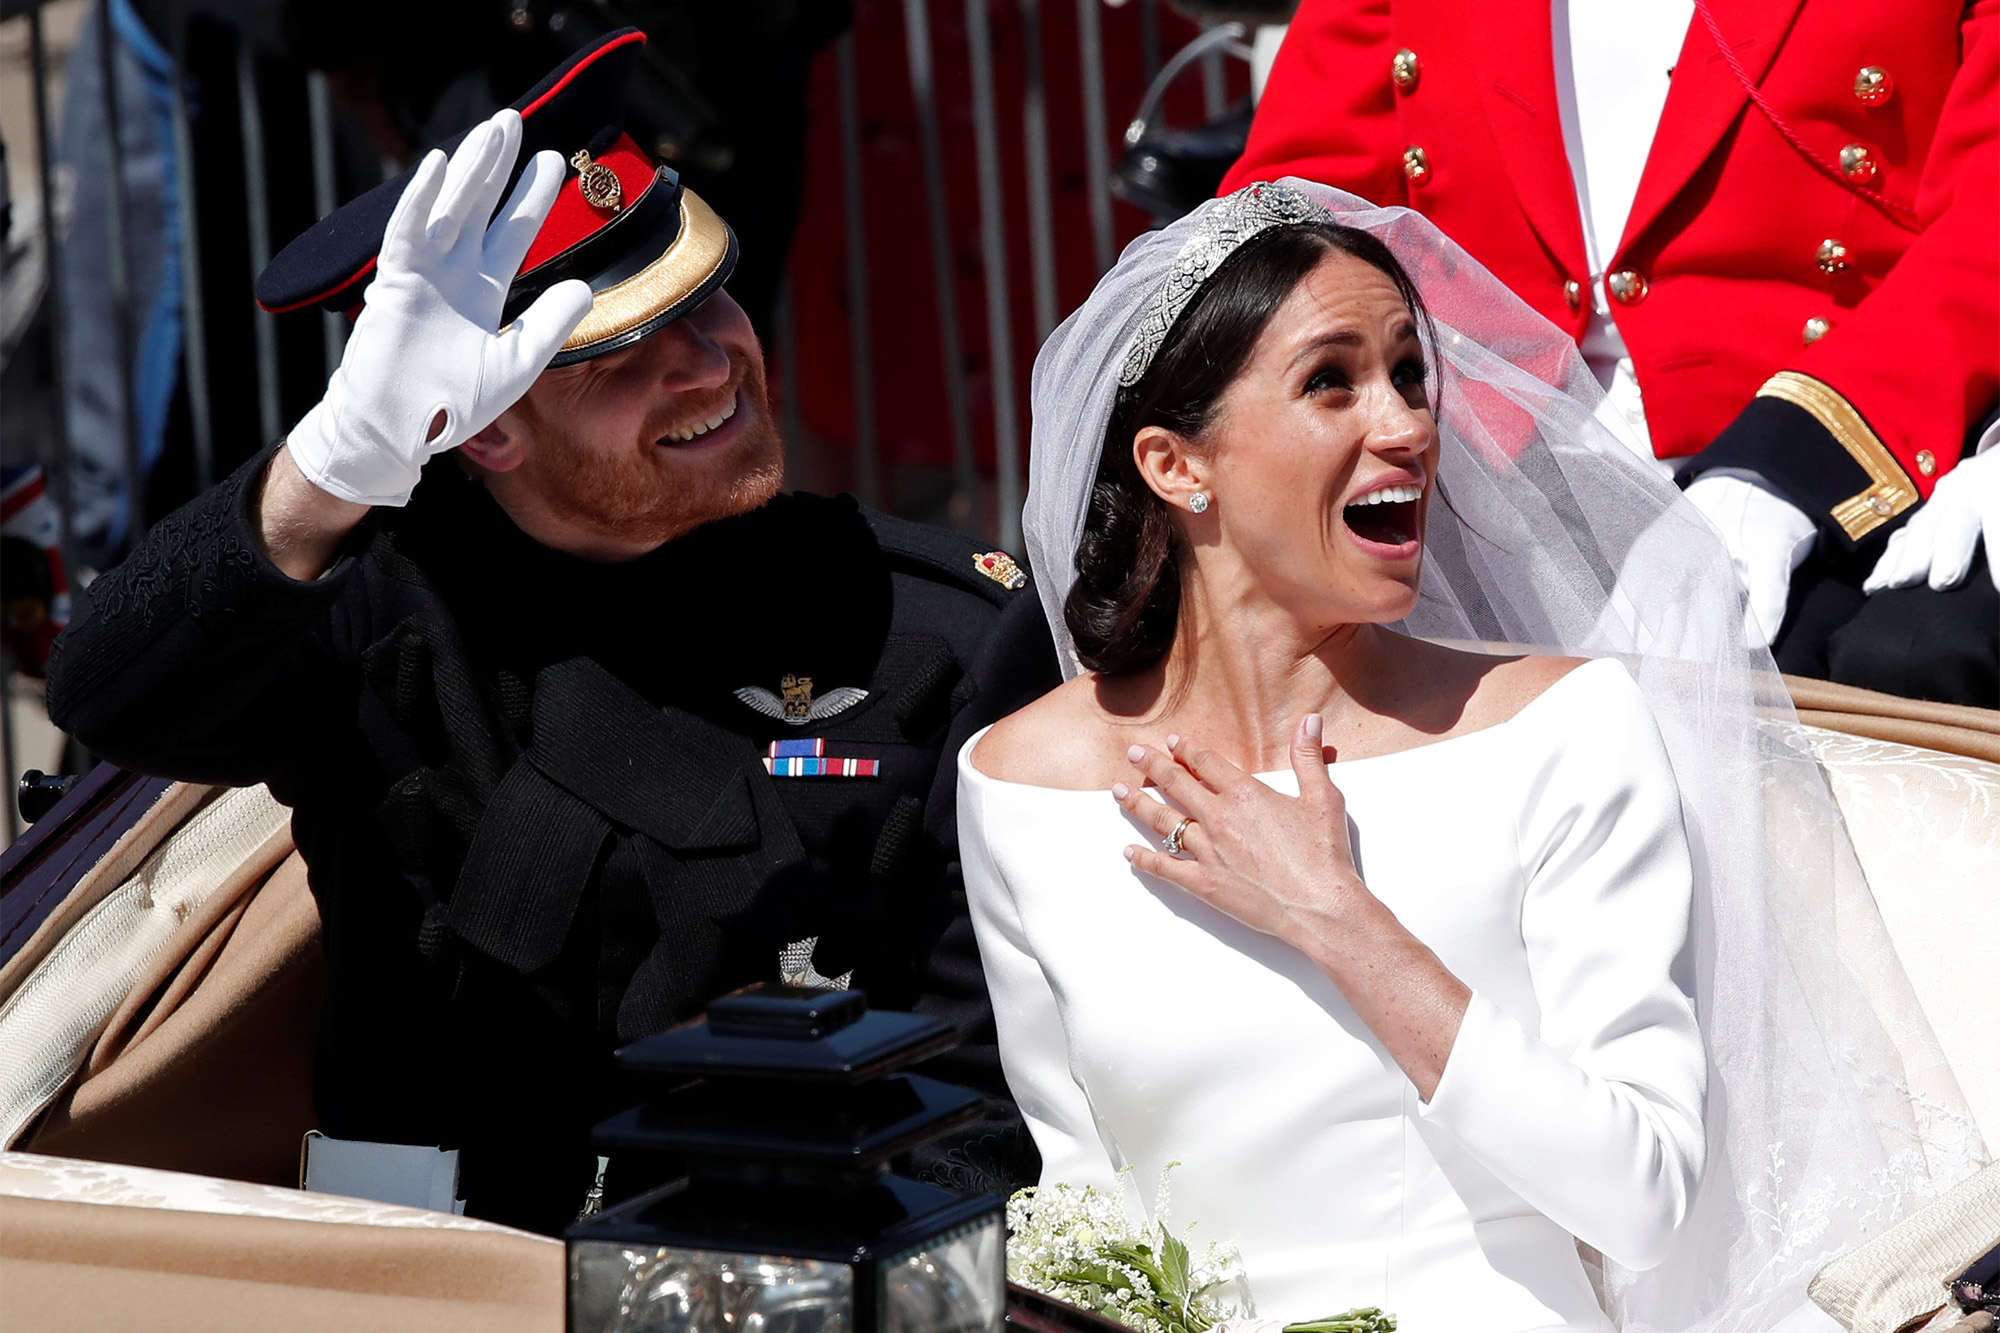 Prince Harry and Meghan Markle are married